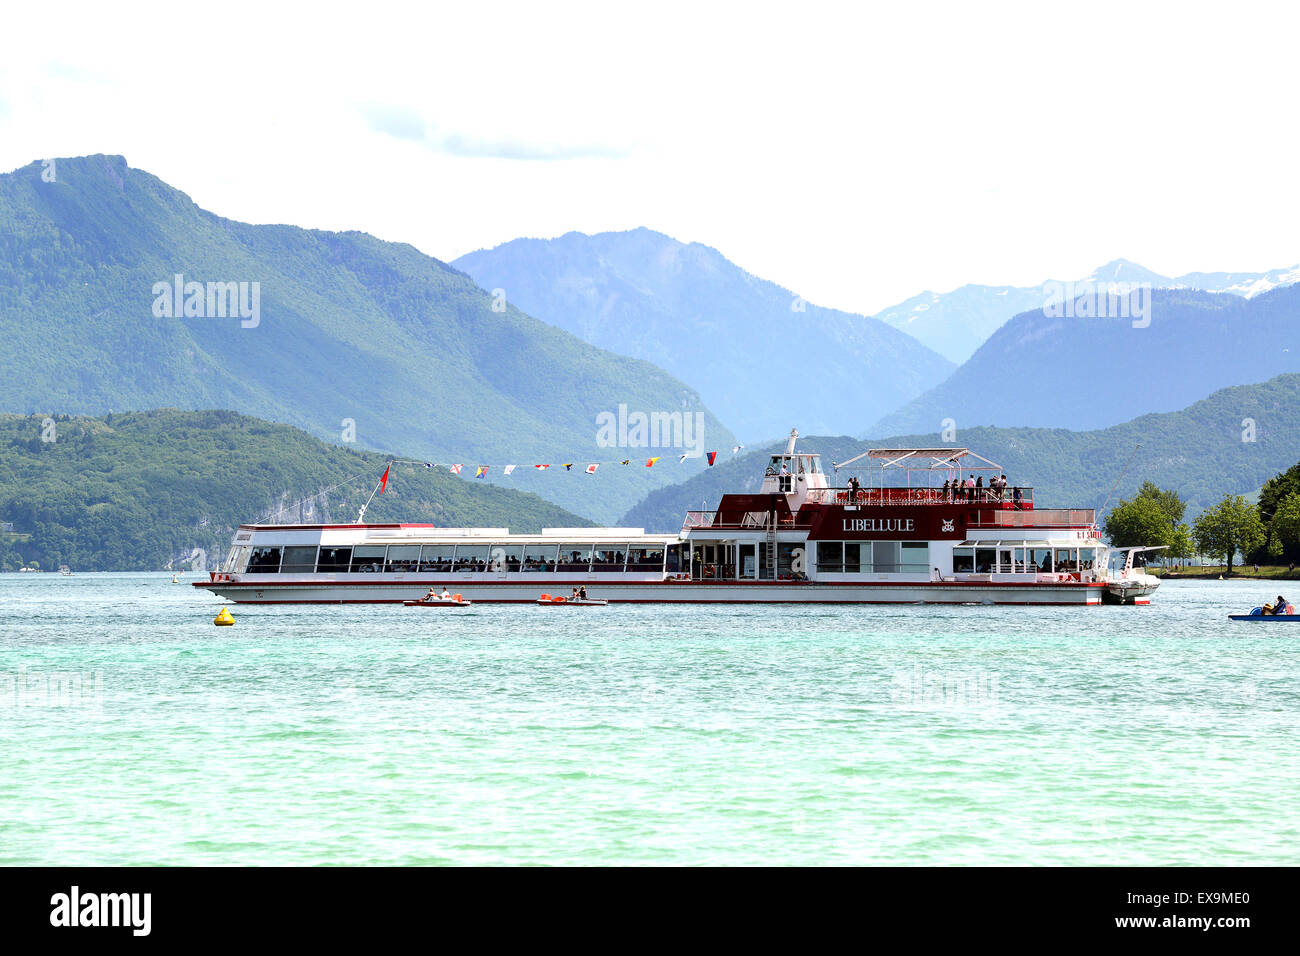 Libellule floating reastaurant boat ship Lake Annecy boats boating busy France Stock Photo